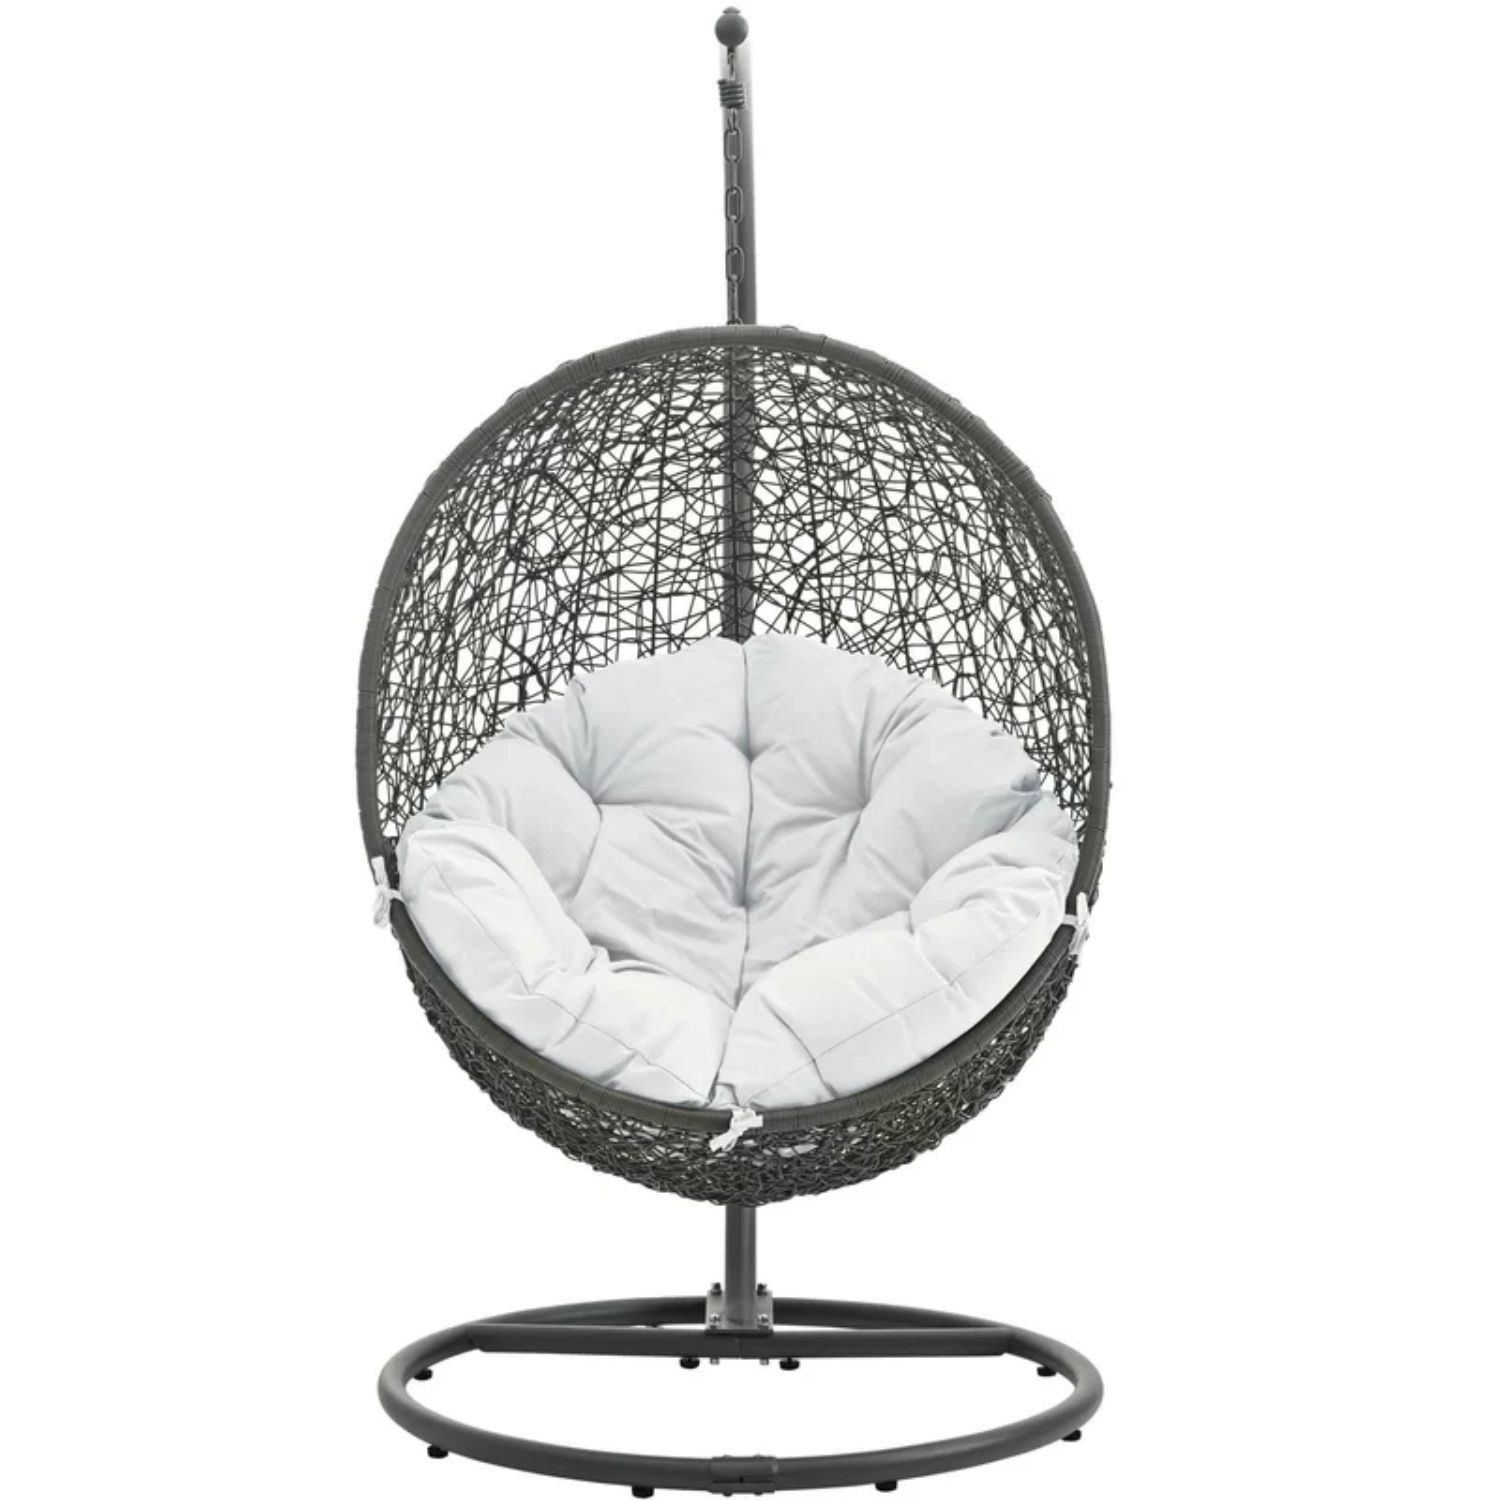 The Best Fire Pit Chairs Option: Swing Chair